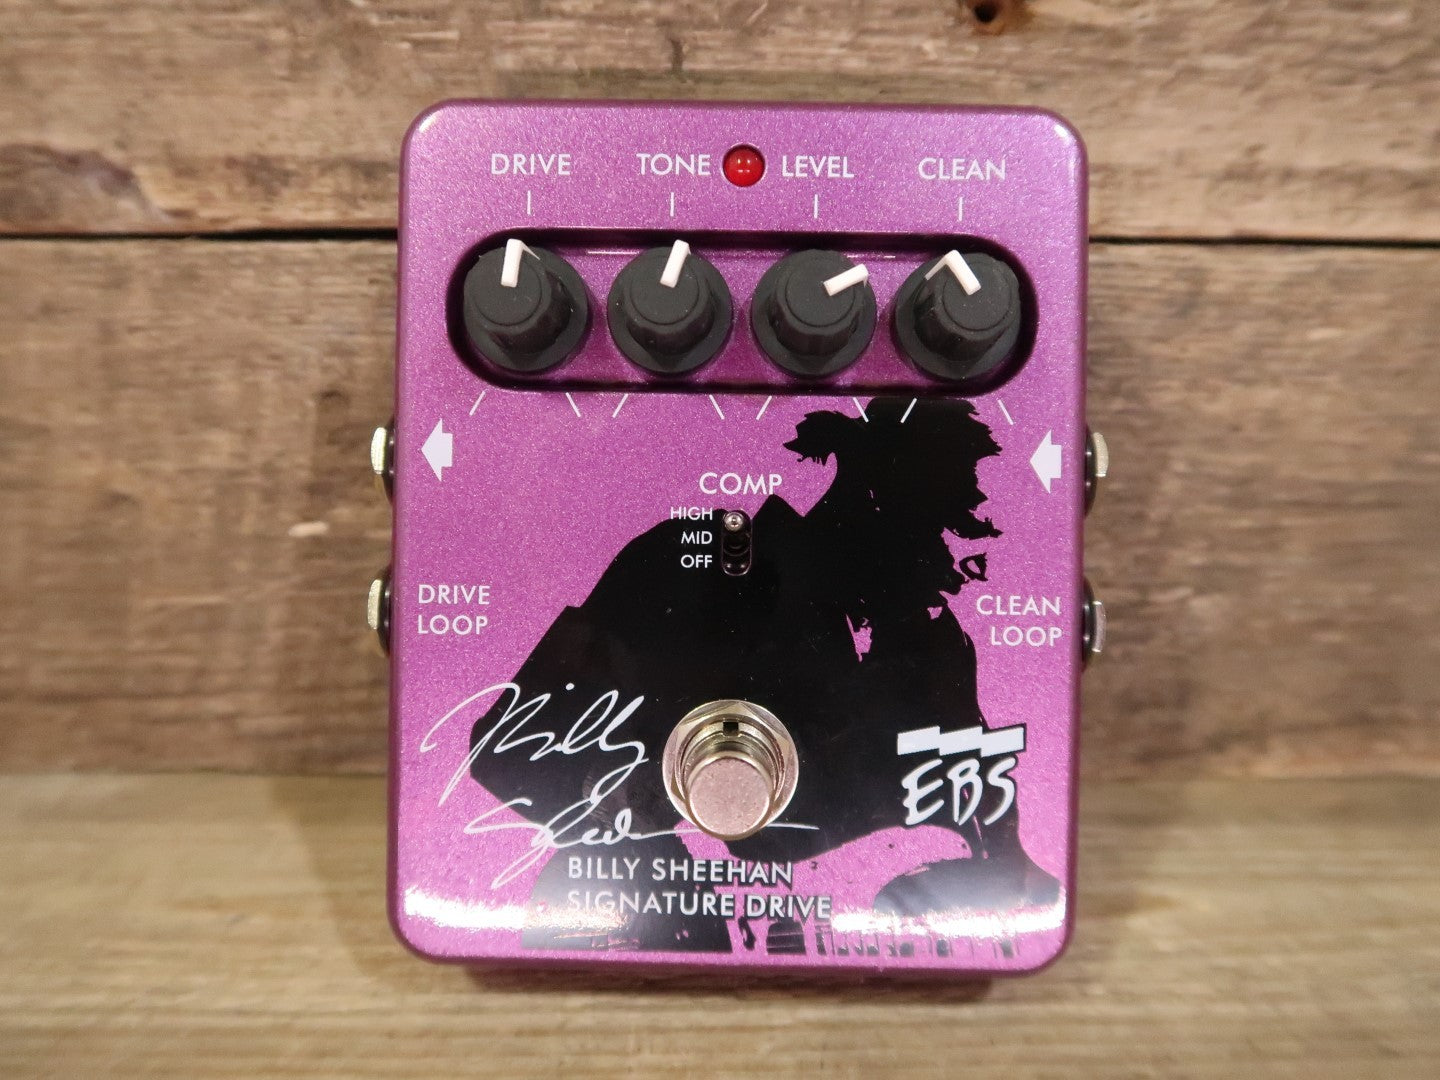 EBS Billy Sheehan Signature Drive (incl box, cable, manual)